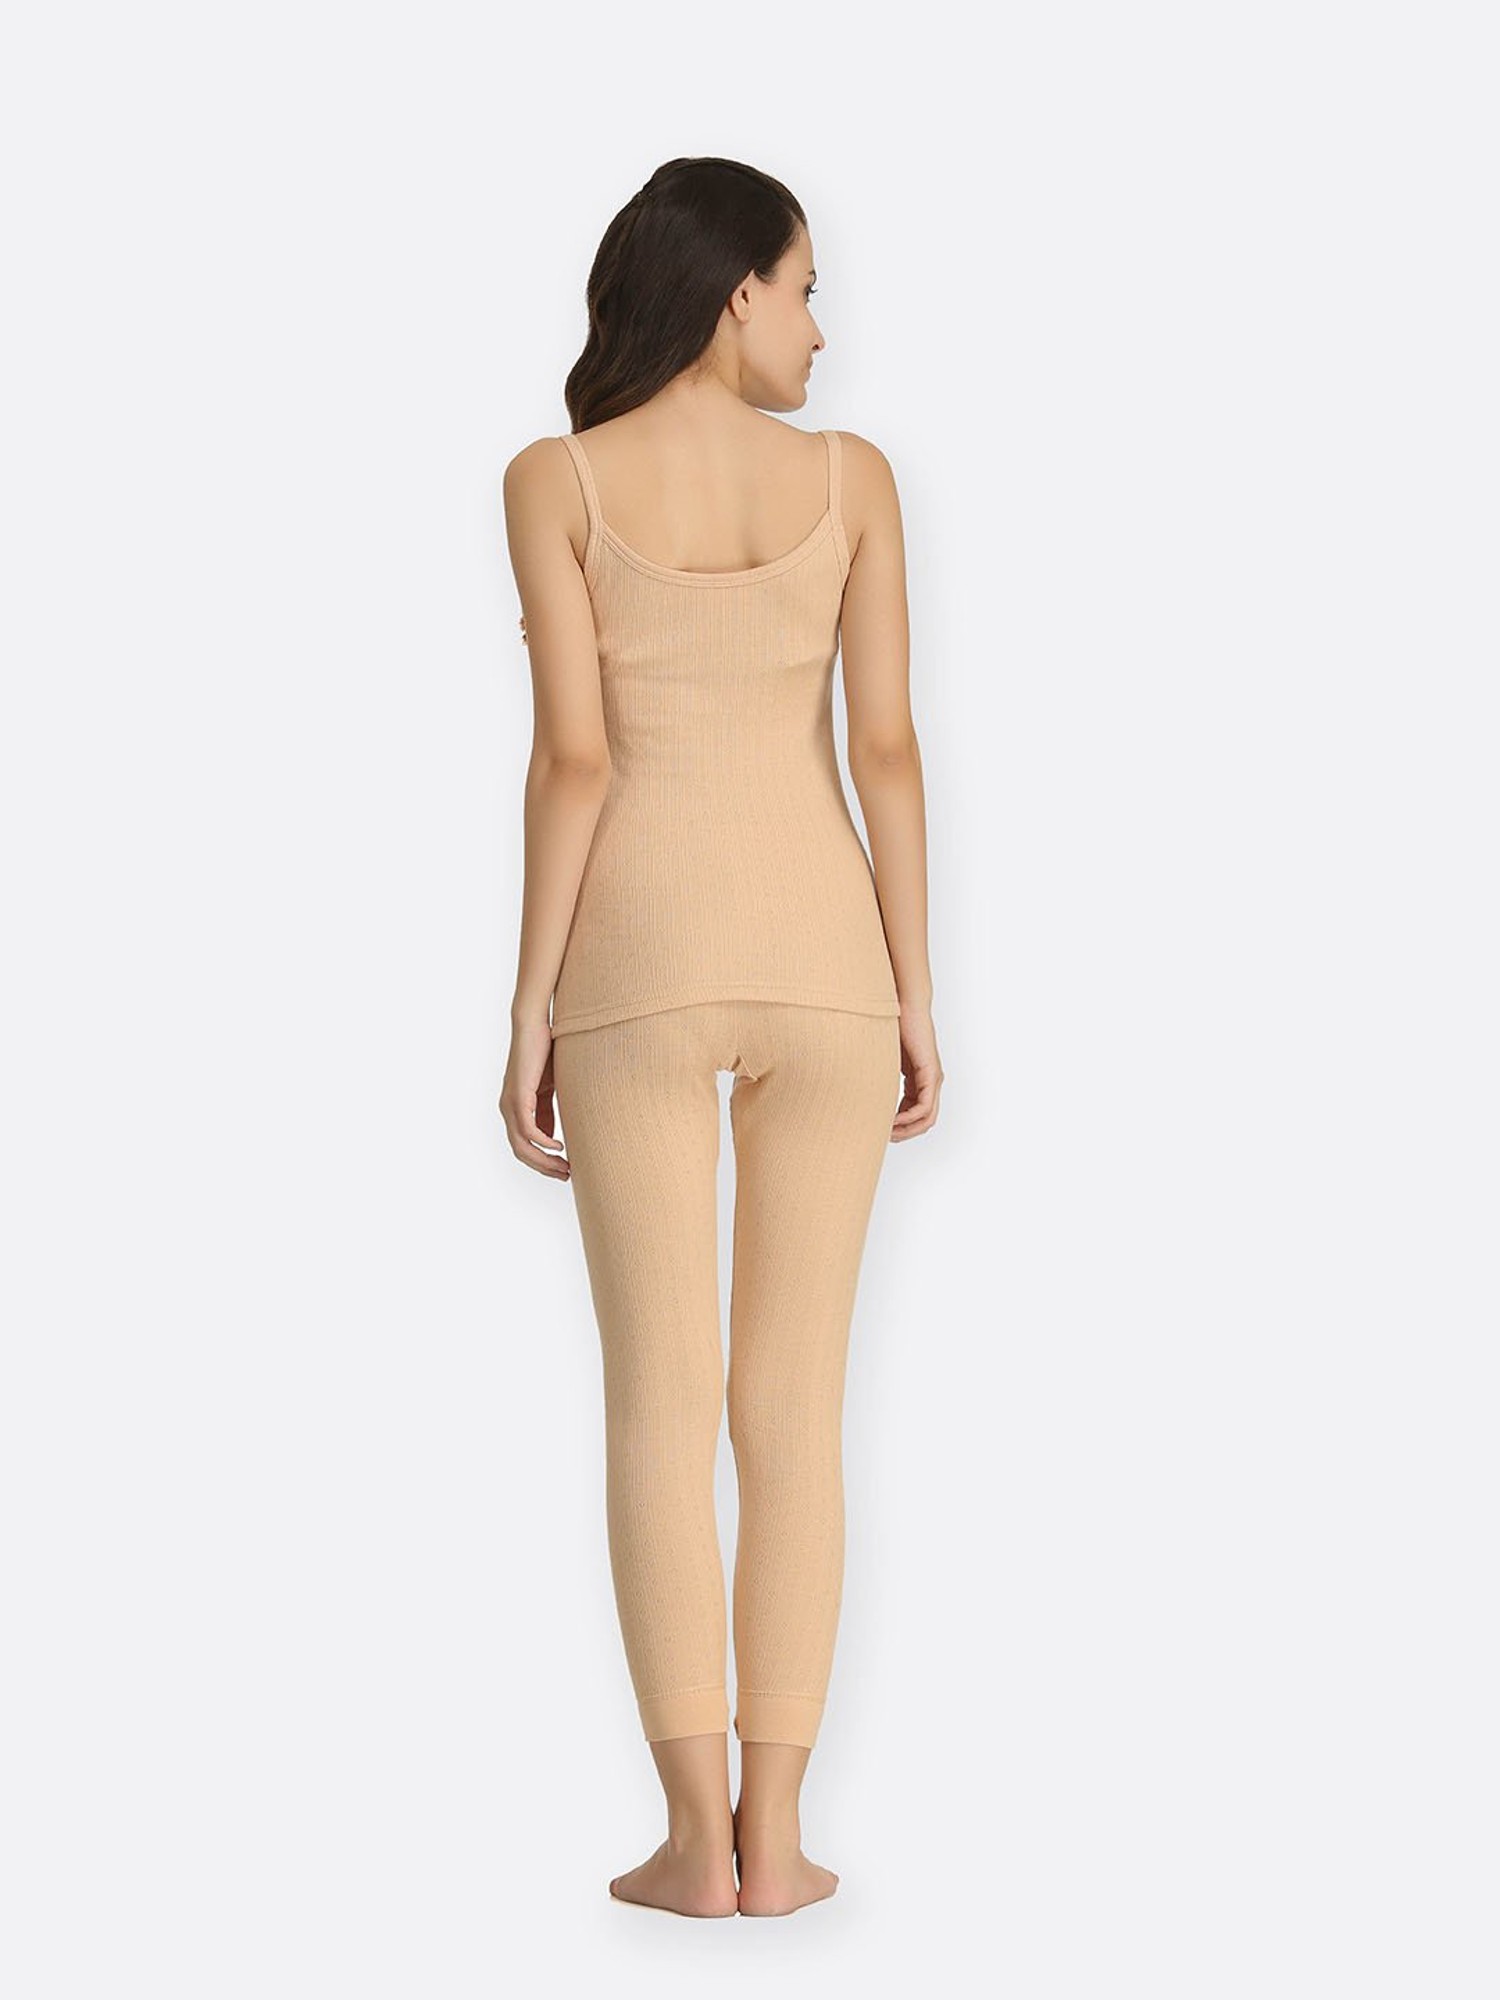 Buy Kanvin Beige Thermal Camisole for Women Online @ Tata CLiQ